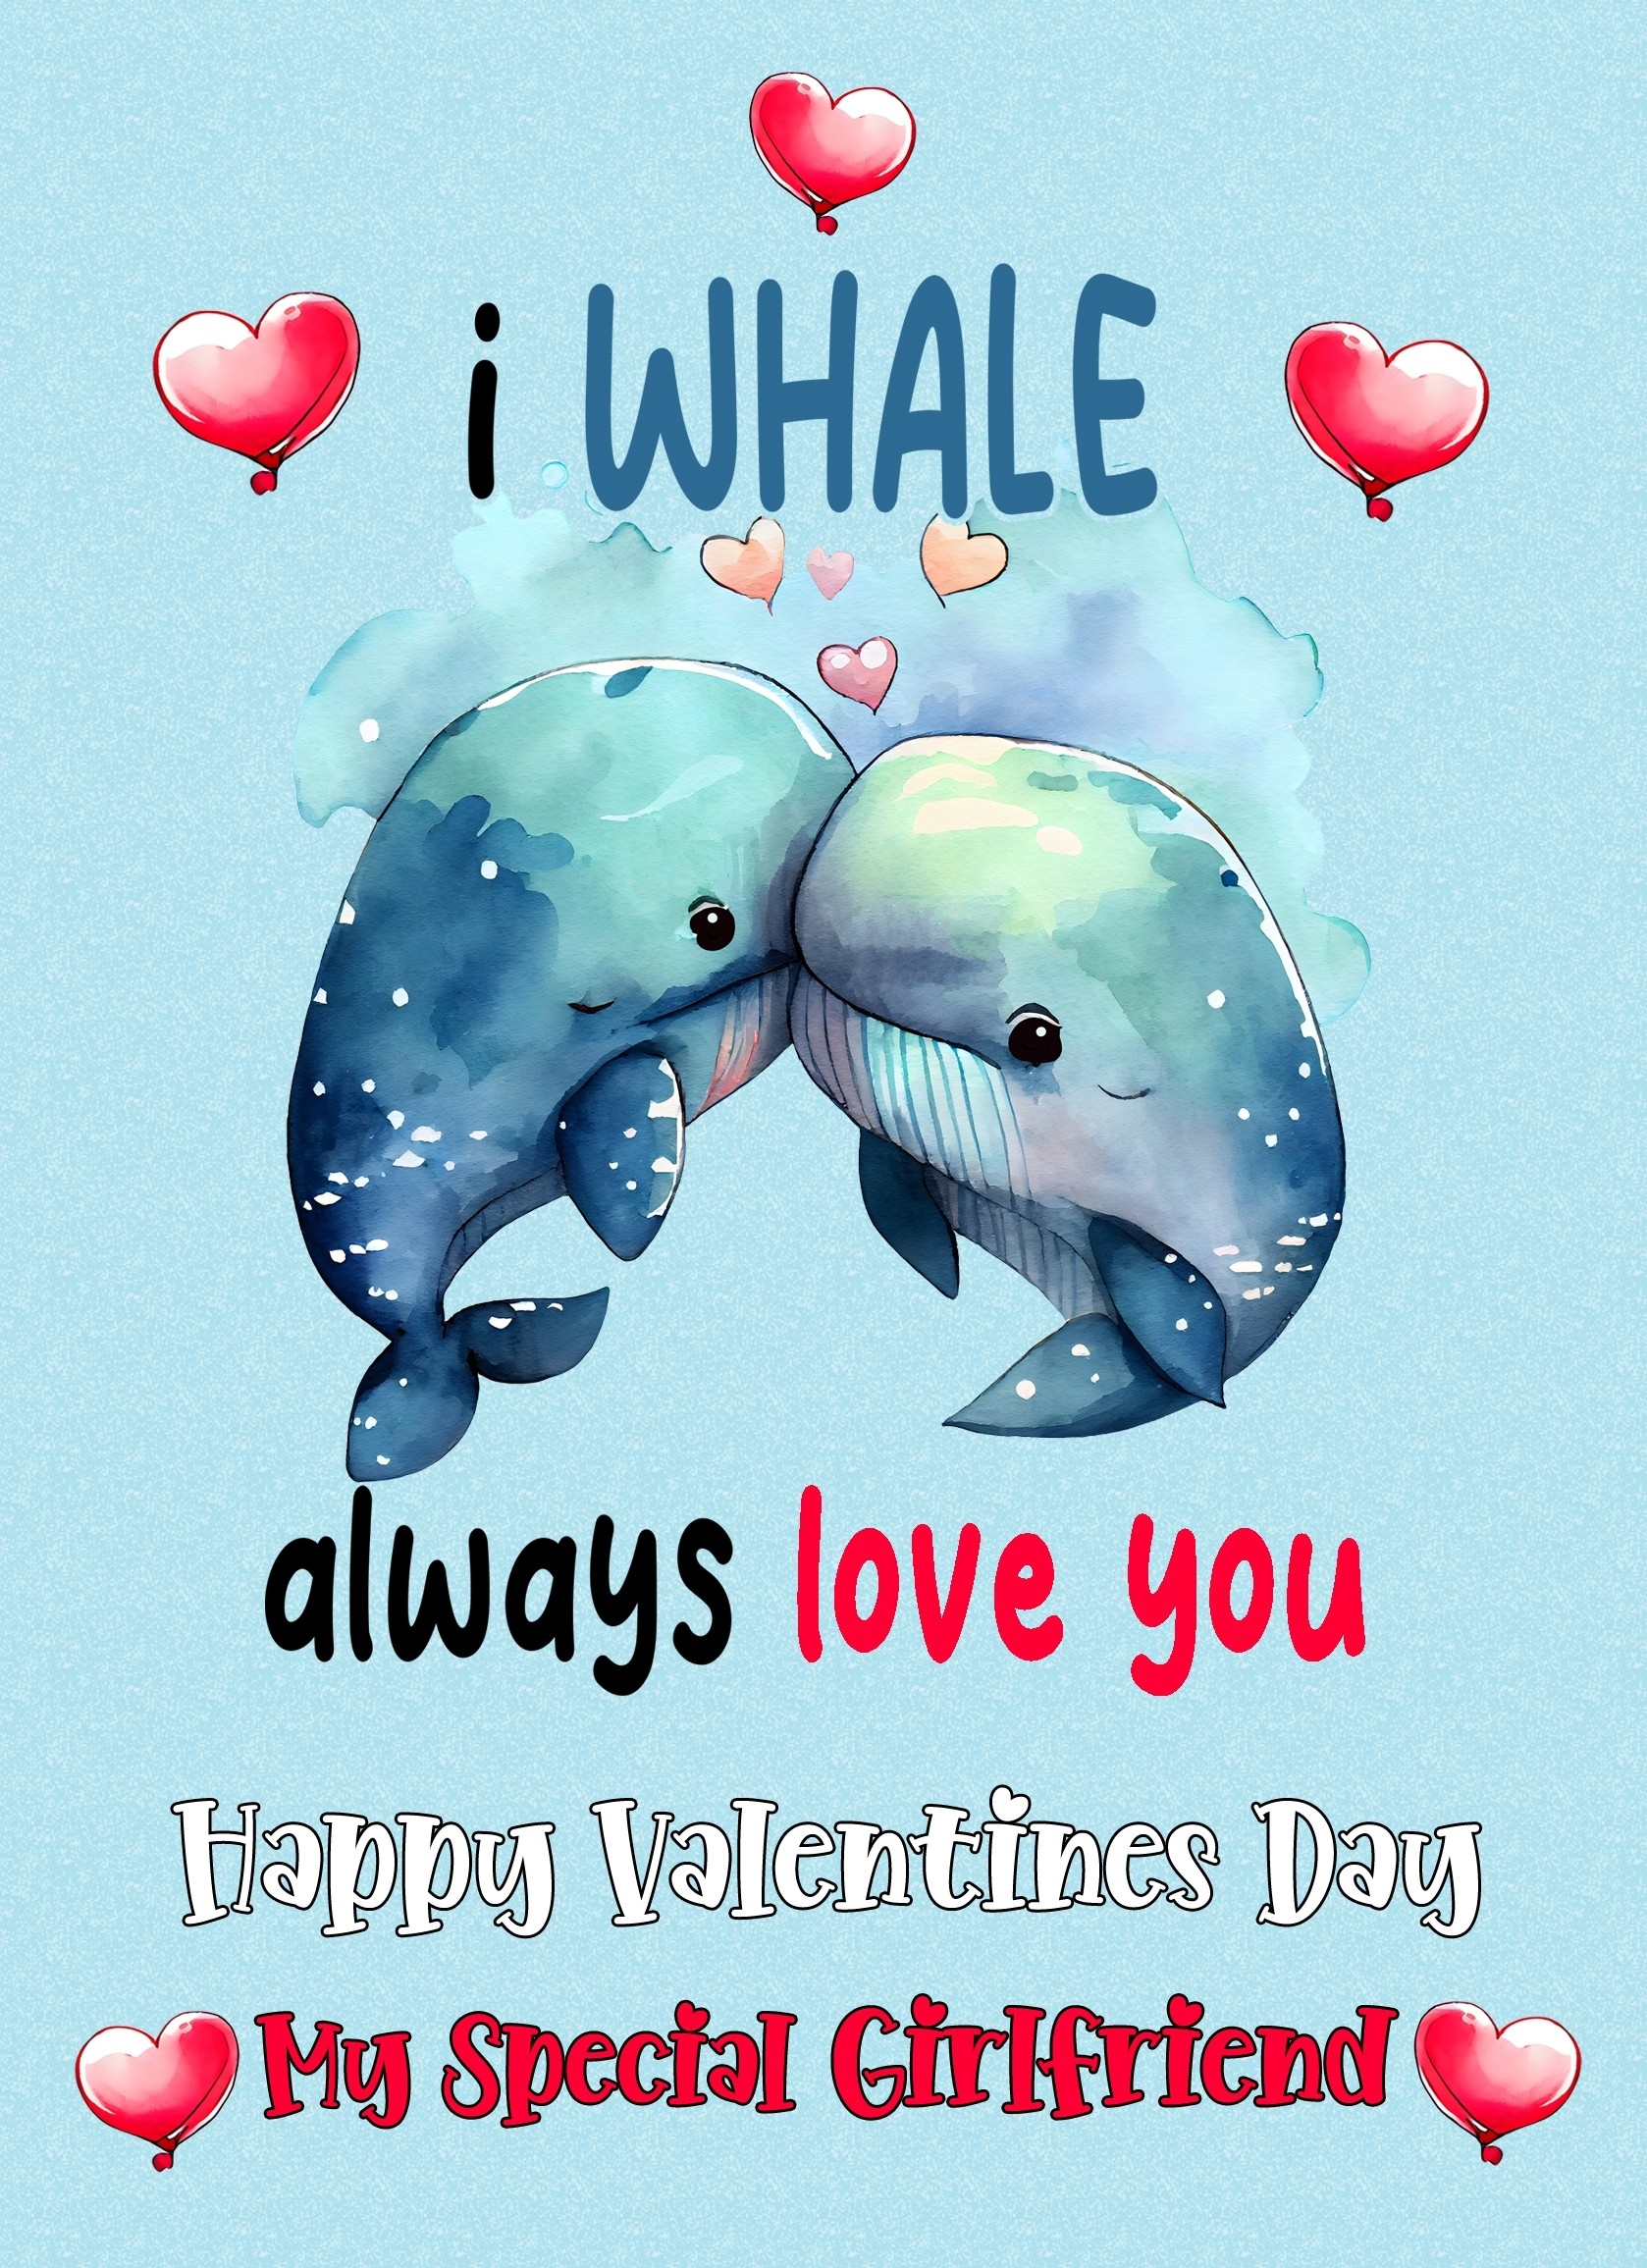 Funny Pun Valentines Day Card for Girlfriend (Whale)